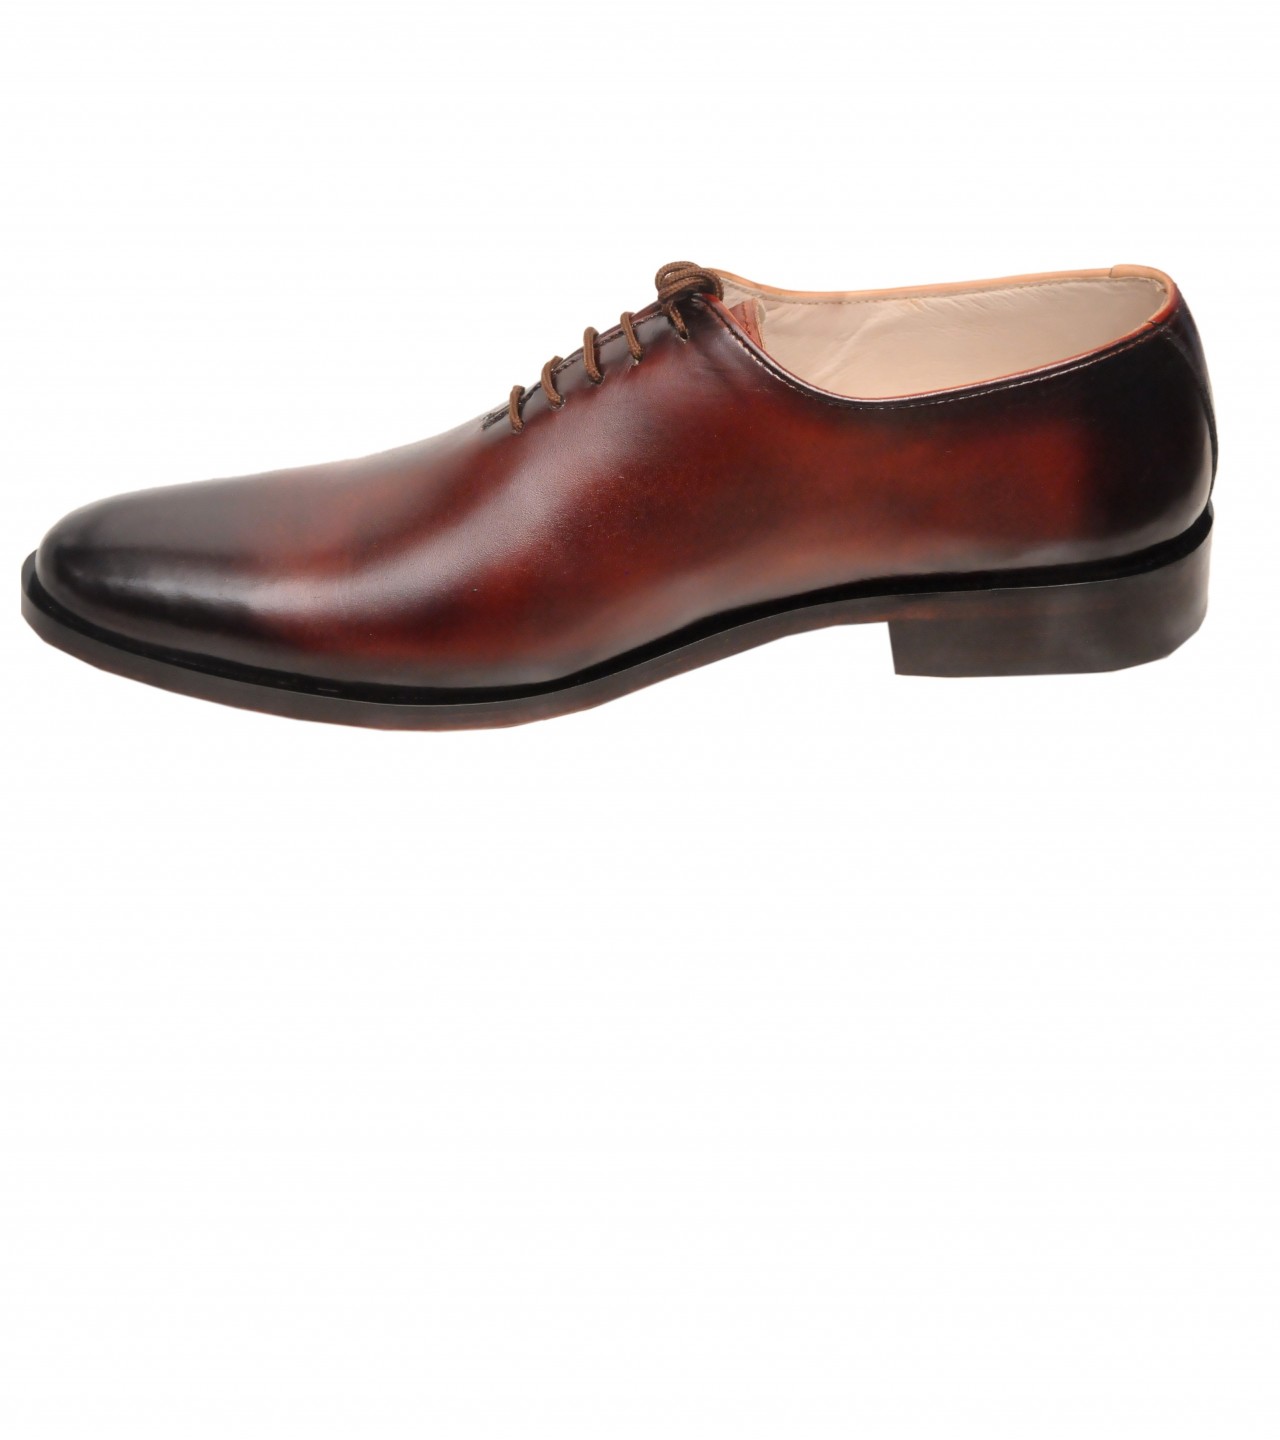 MEN'S FORMAL SHOES HAND PATINA FINISH 39-45